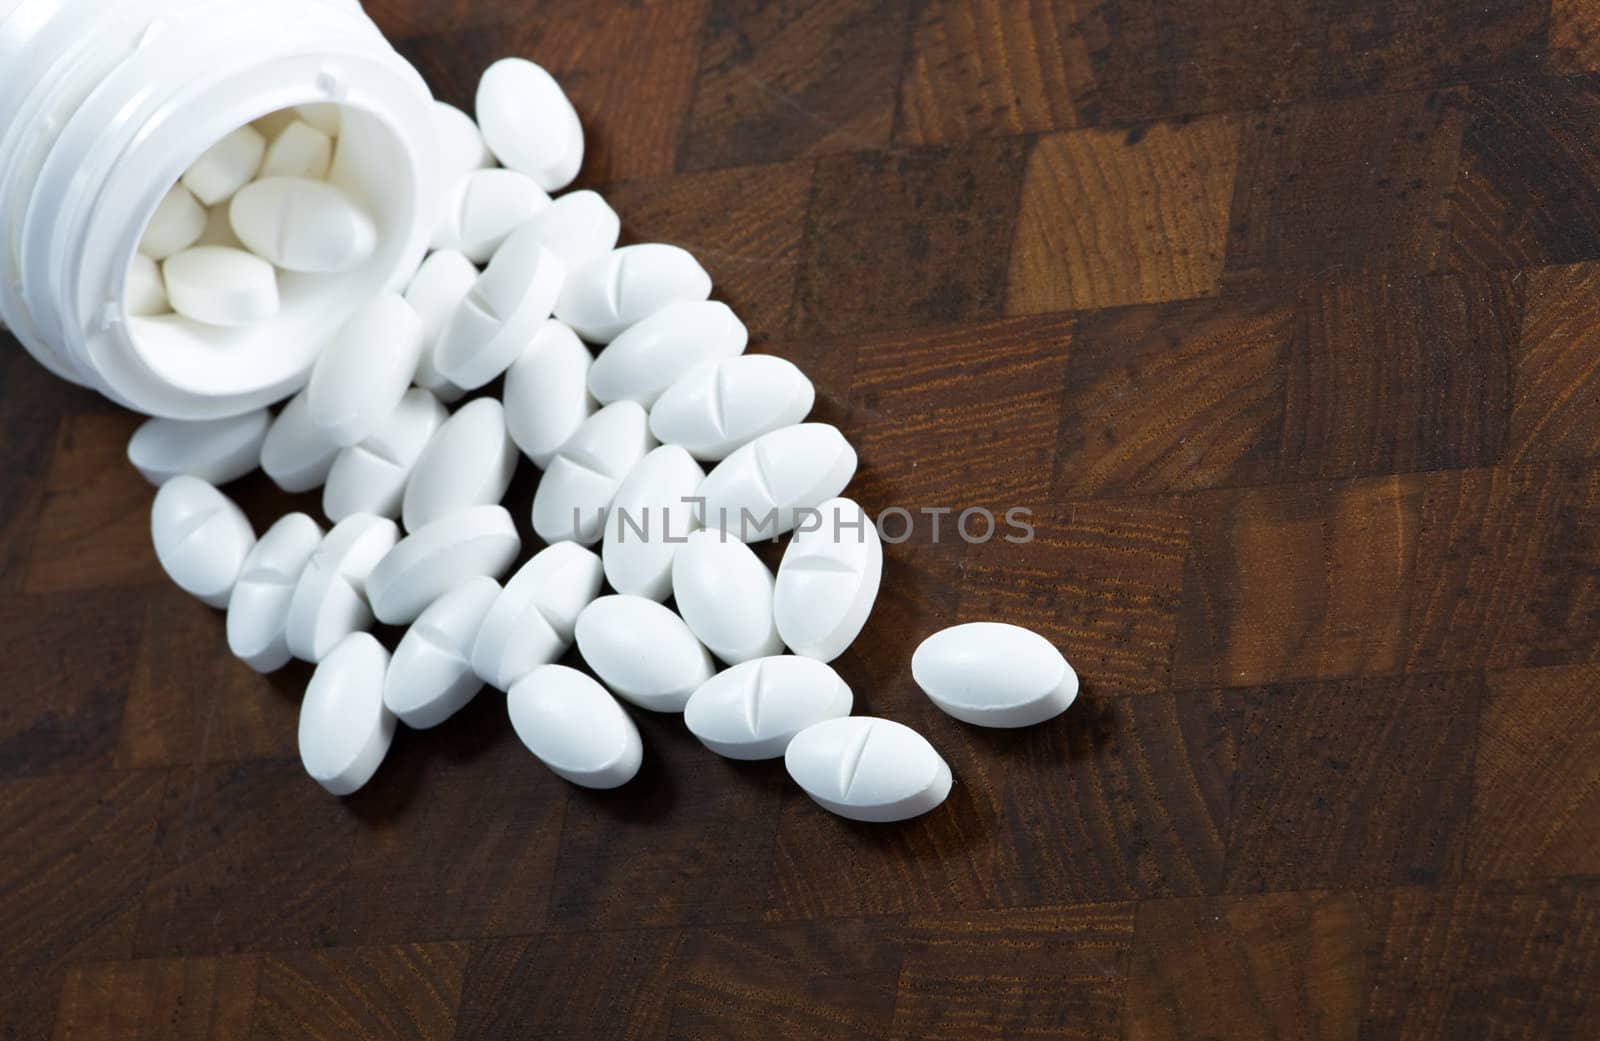 Glass of pills on wood background by fljac